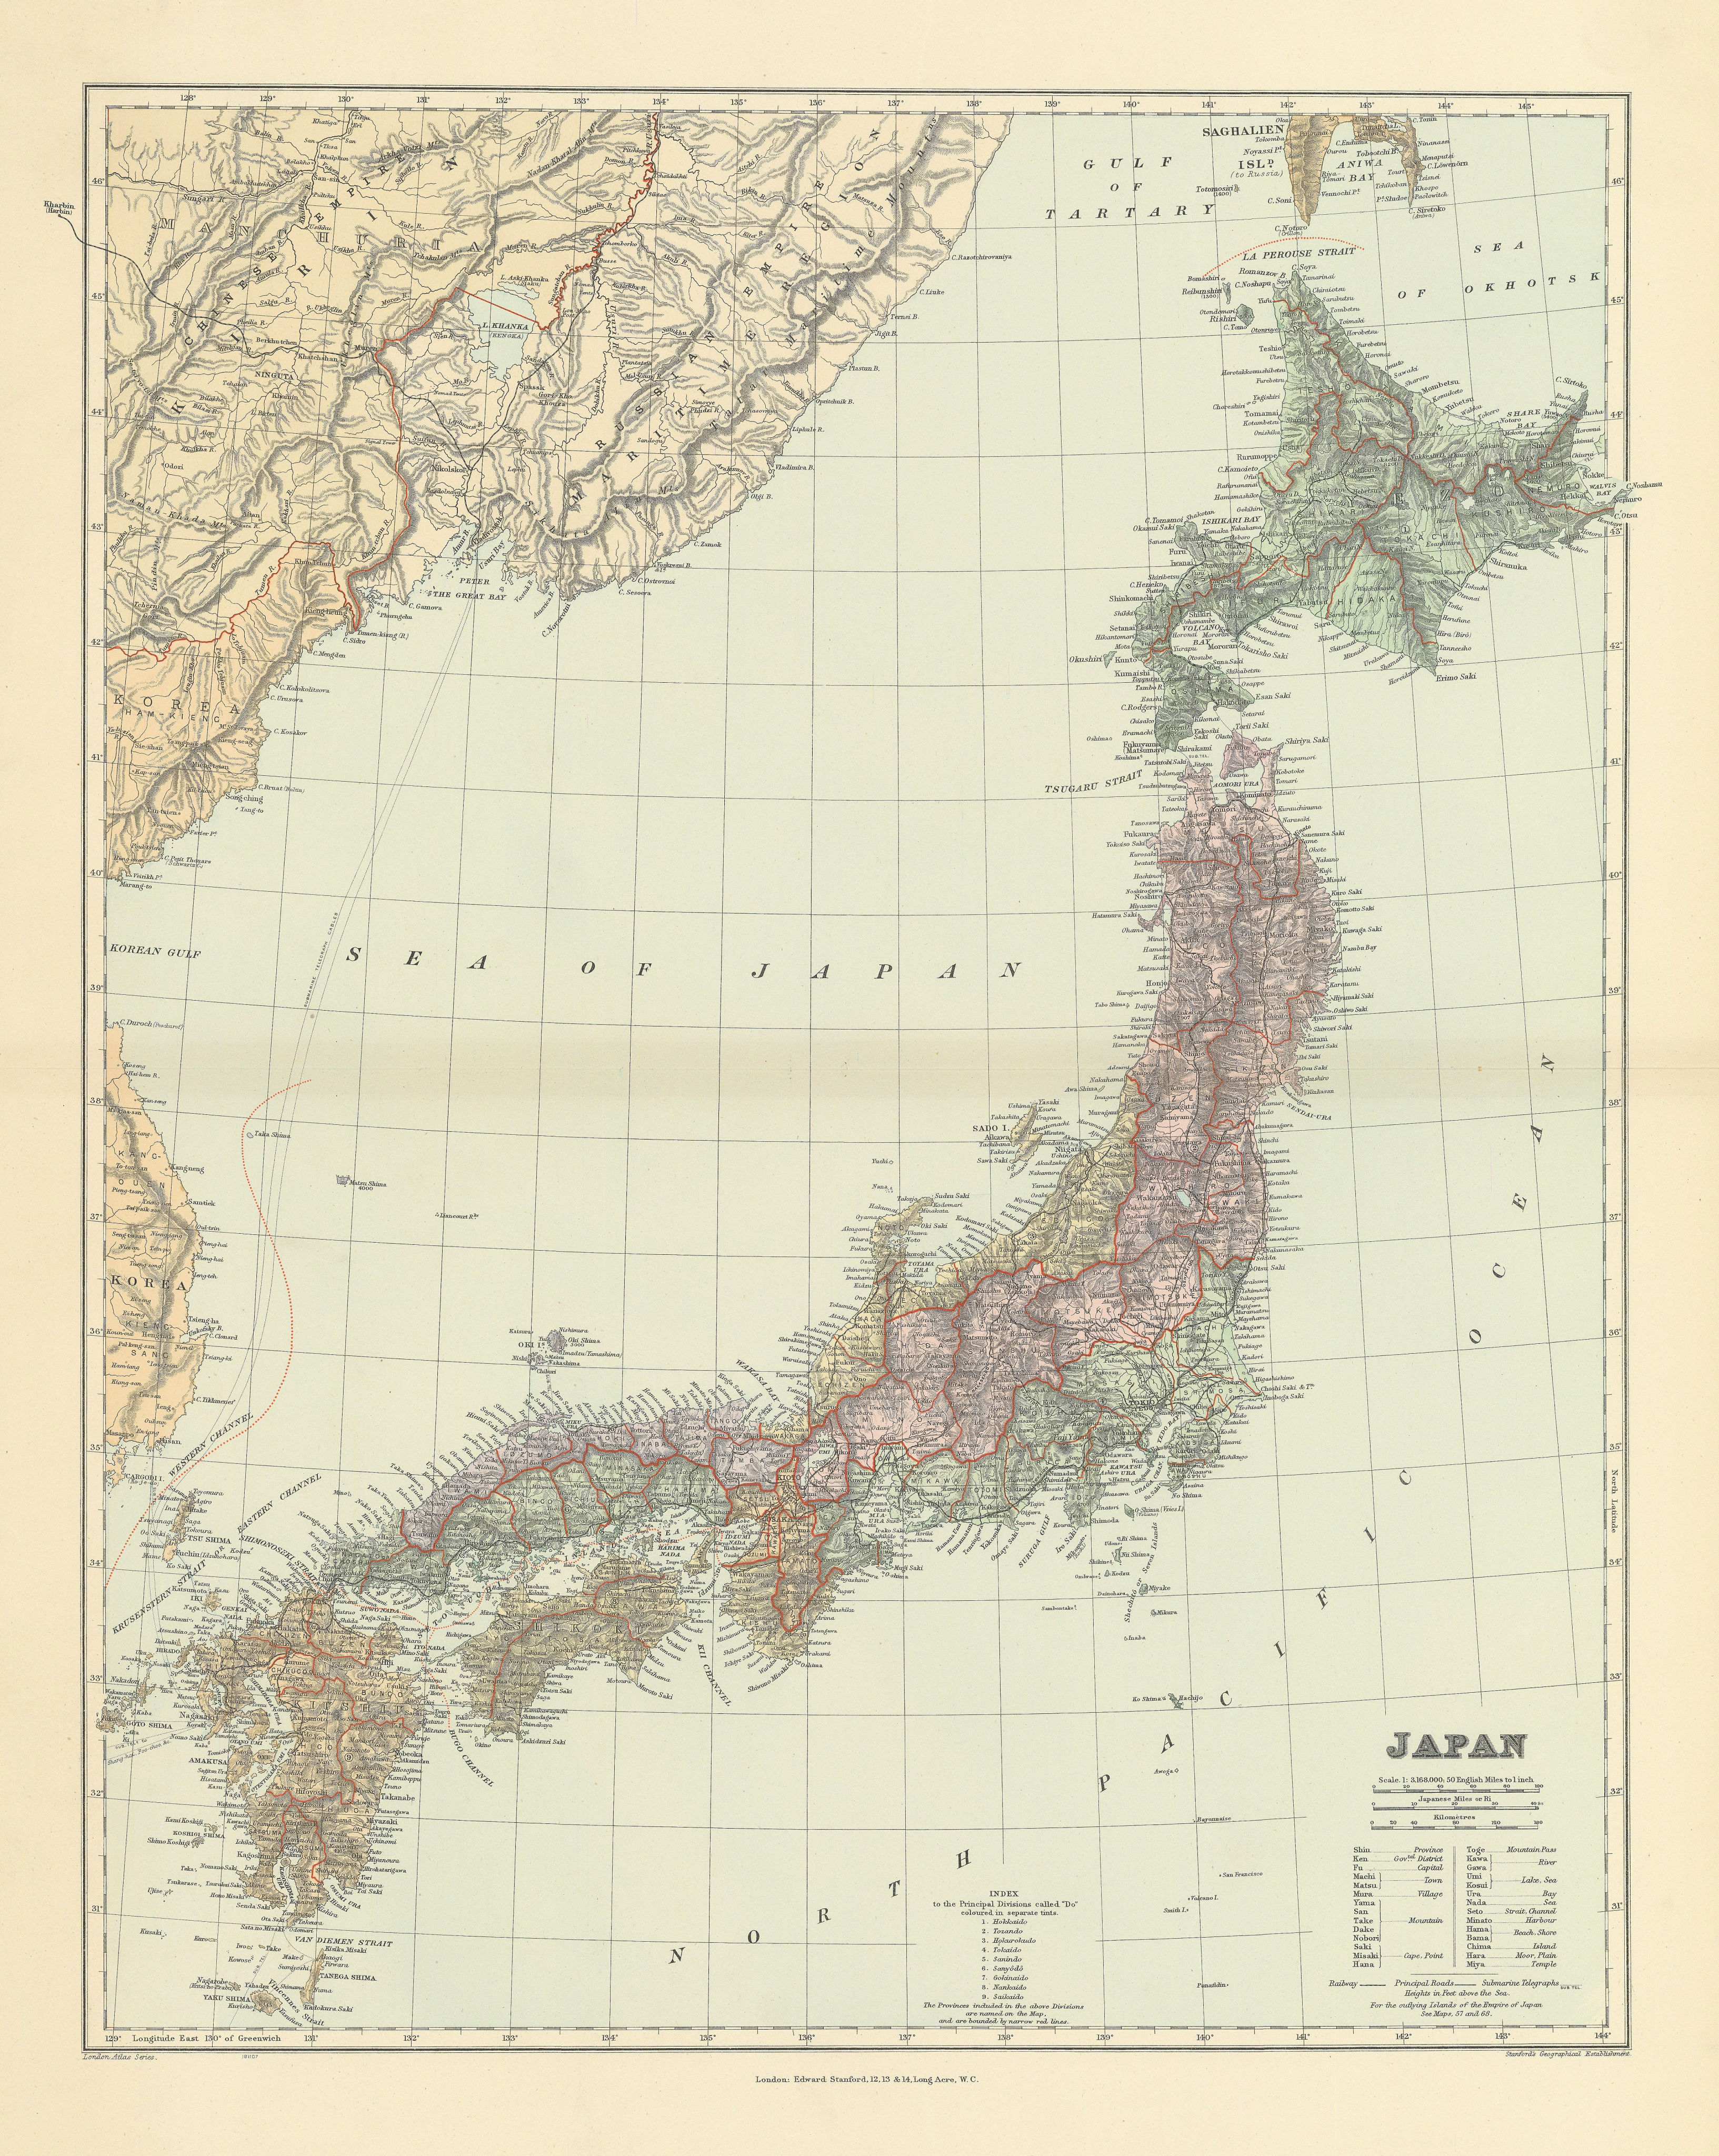 Associate Product The Islands of Japan, in Provinces/prefectures. 65x52cm STANFORD 1904 old map